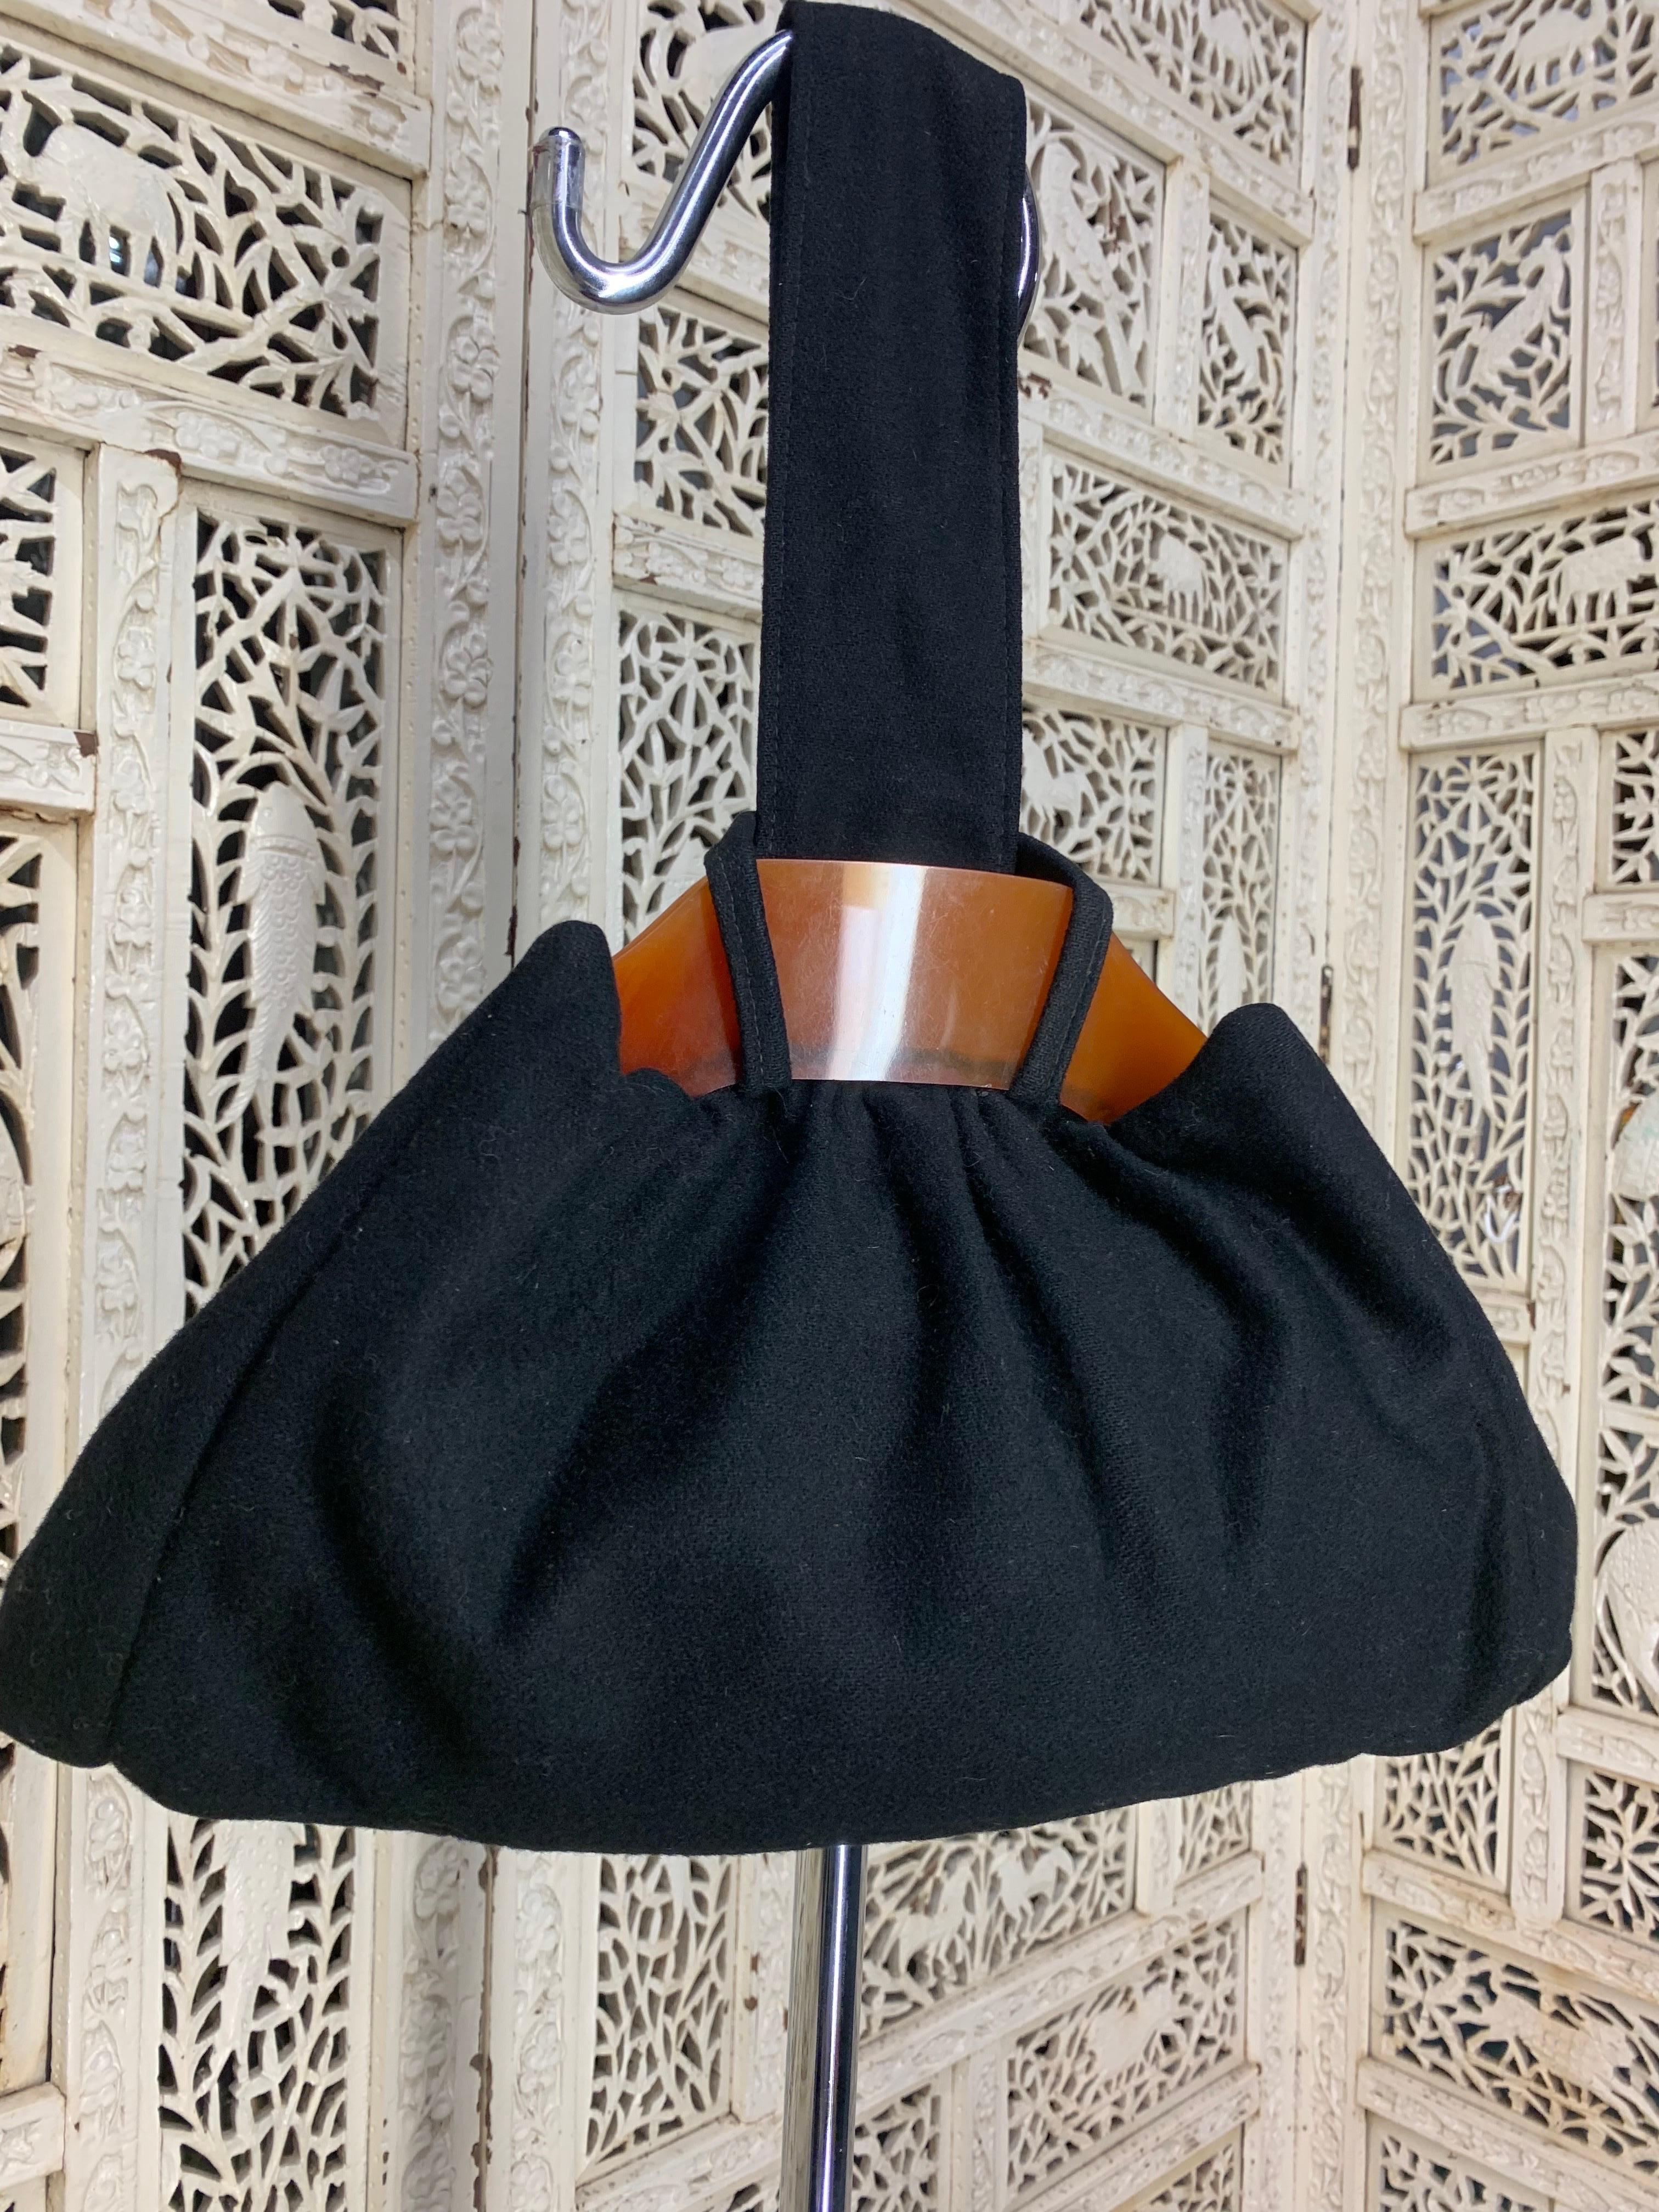 1940s Black Felt Handbag w Large Bakelite Frame and Loop Handle: Triangular shaped bag with single loop handle and pointed corners. Beautiful caramel color spring-hinged Bakelite frame. Black satin interior lining. Large sized capacity for a cell